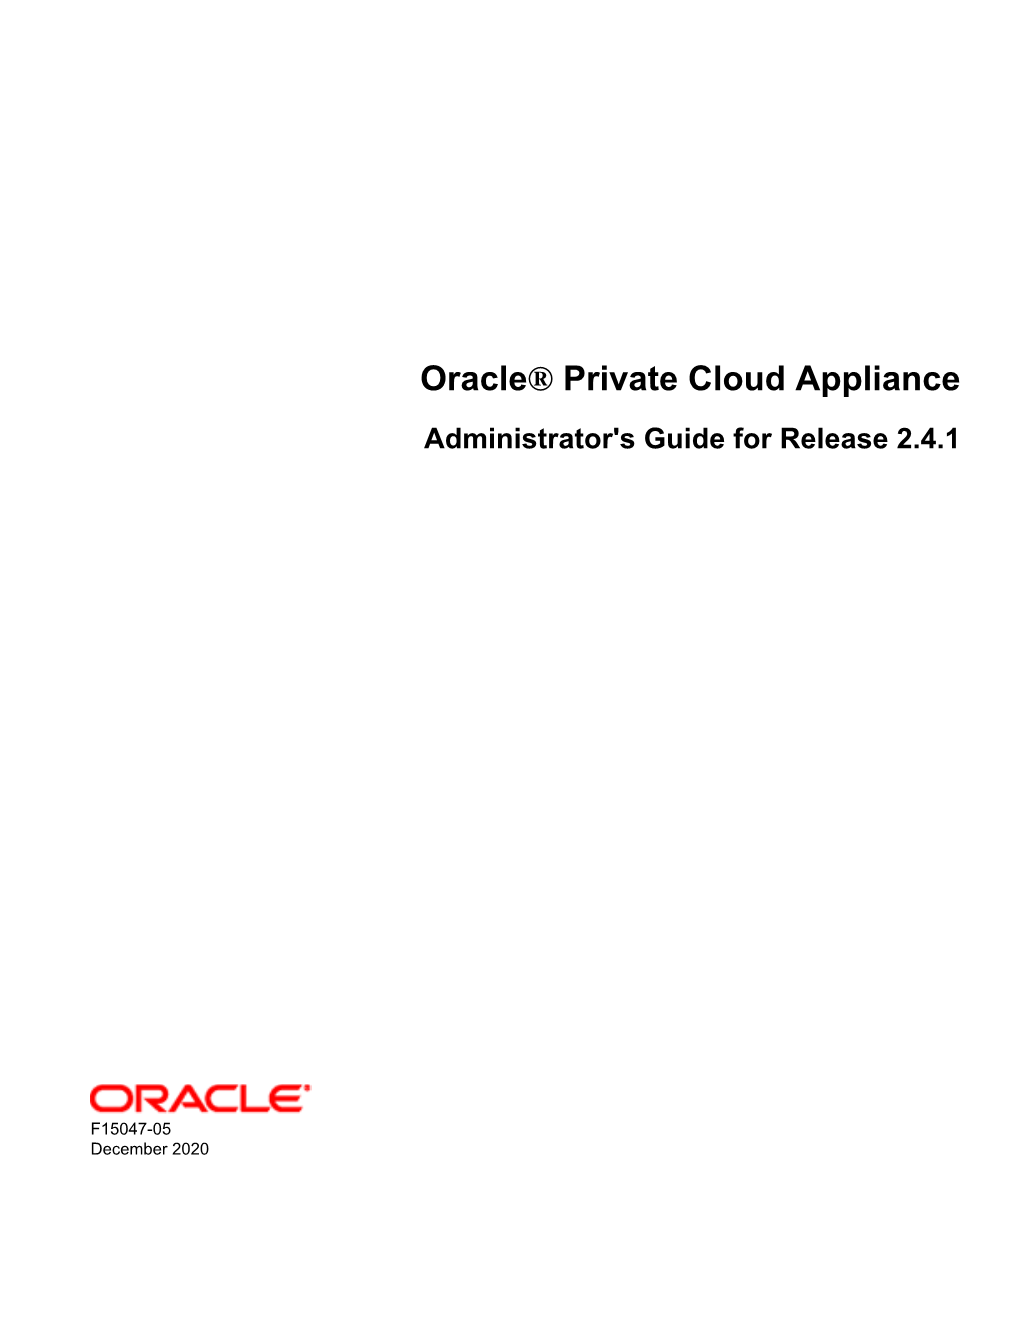 Oracle® Private Cloud Appliance Administrator's Guide for Release 2.4.1